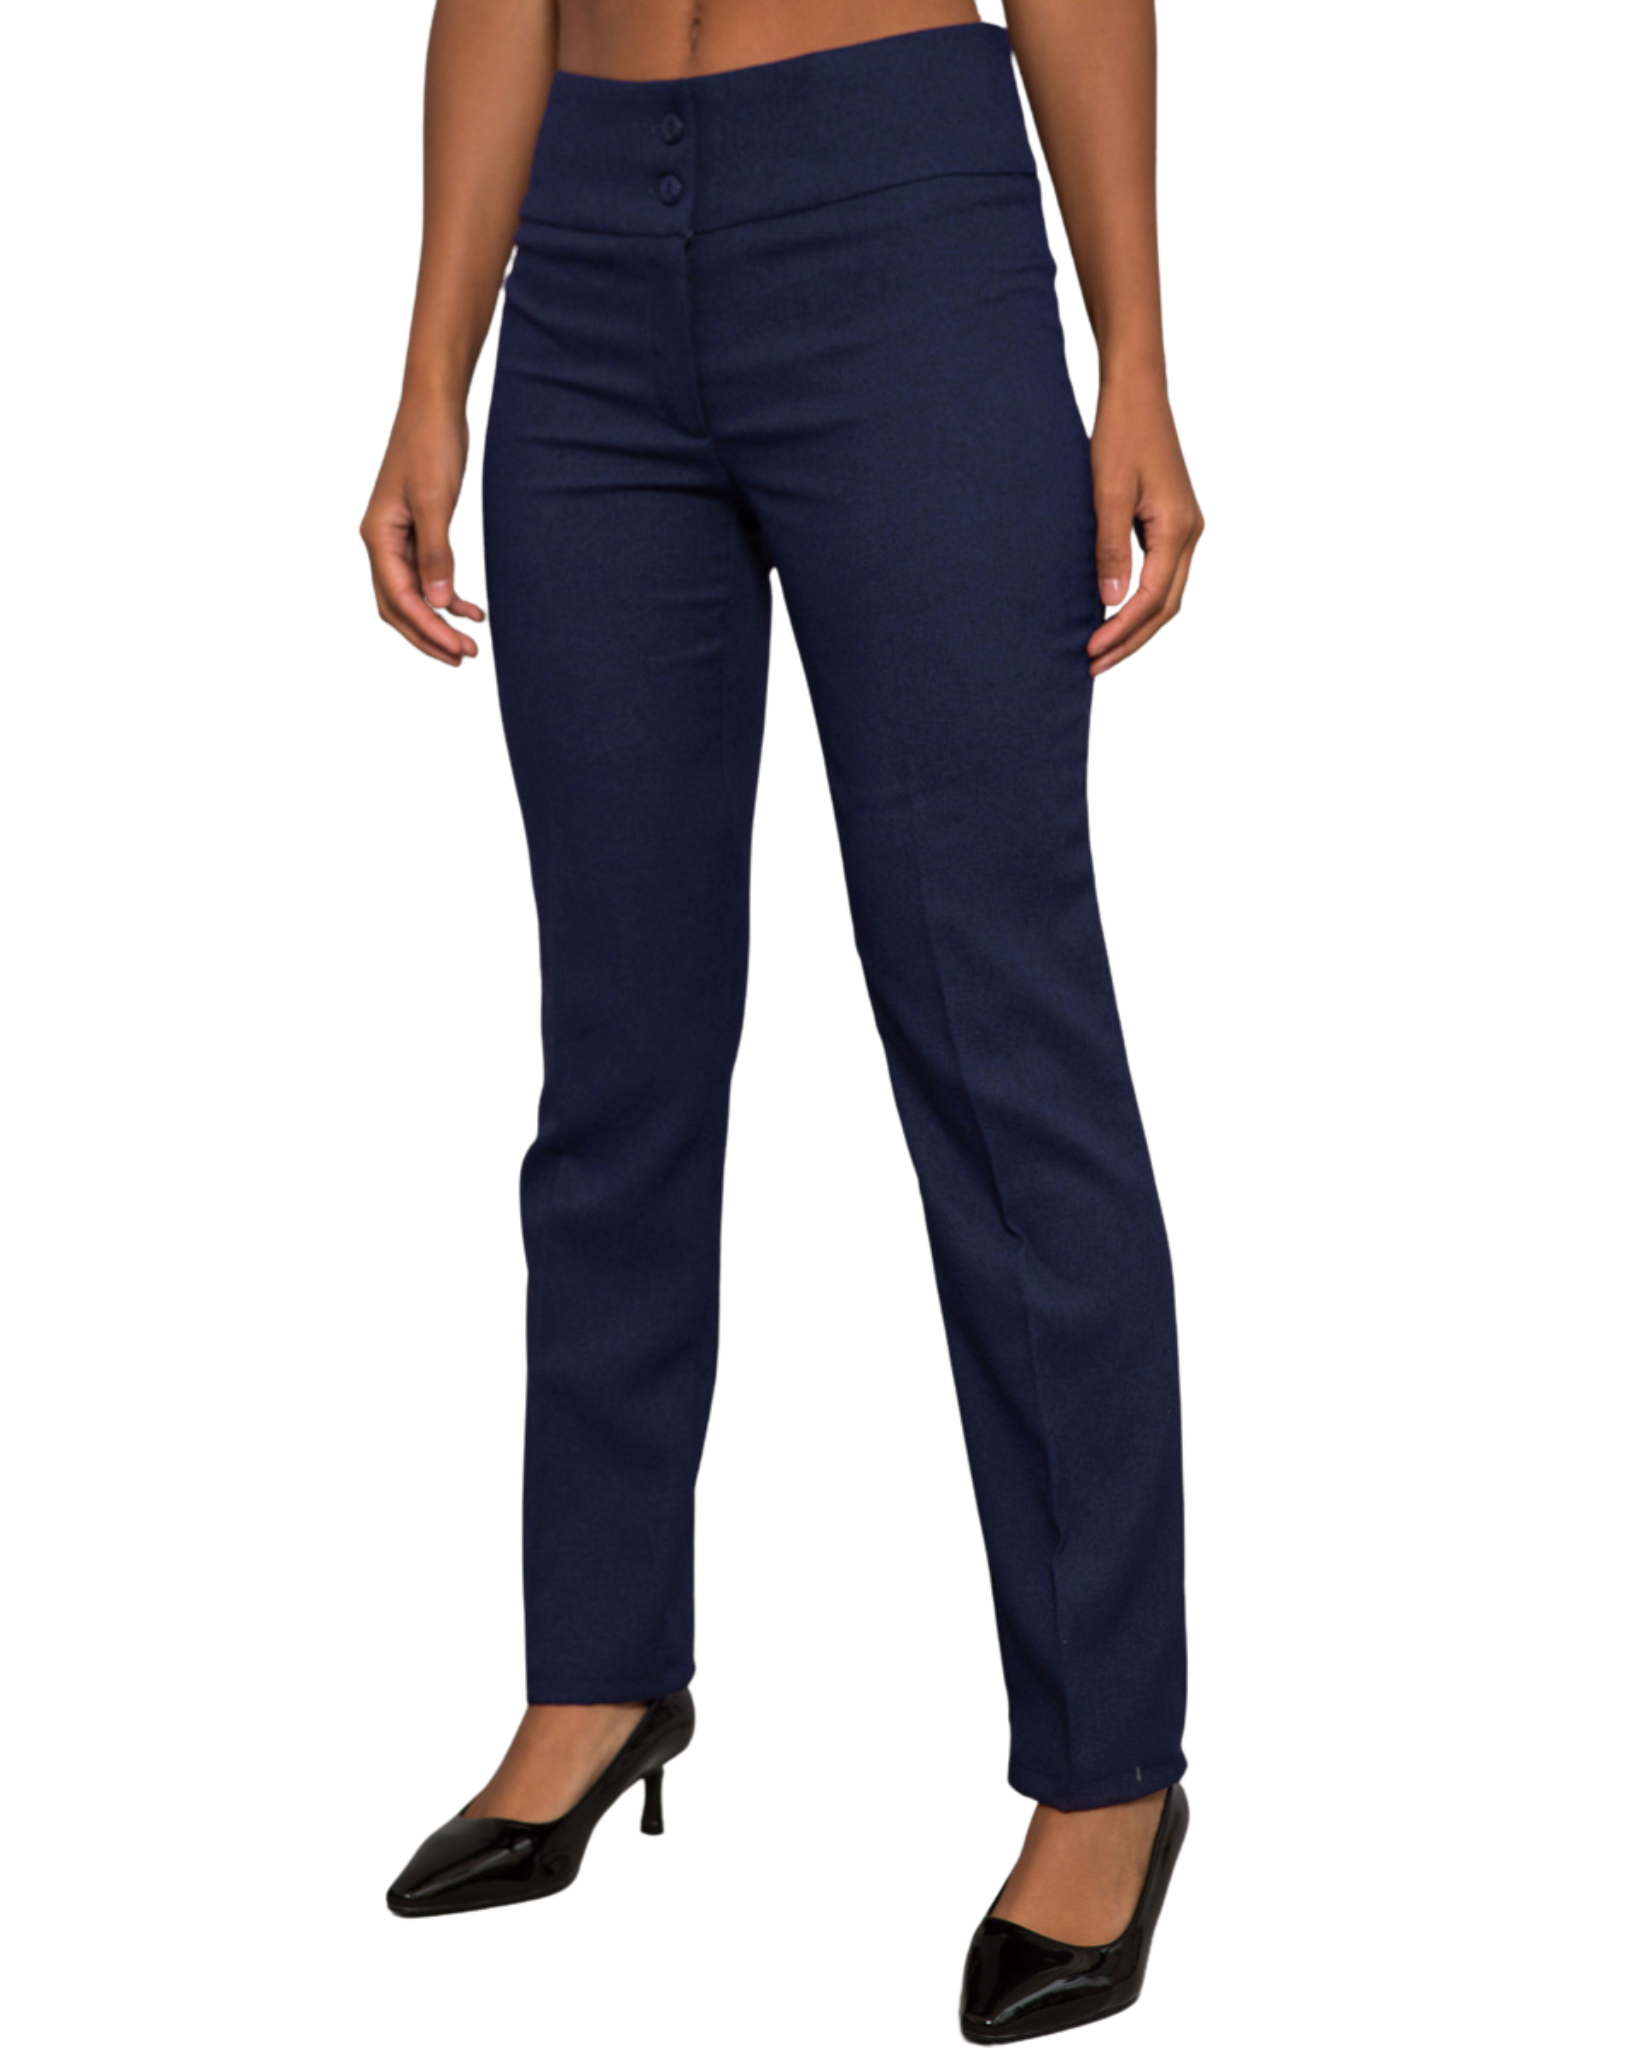 Signature Tailored Fit Spa Therapist Trousers (Luxury Twill) - Navy